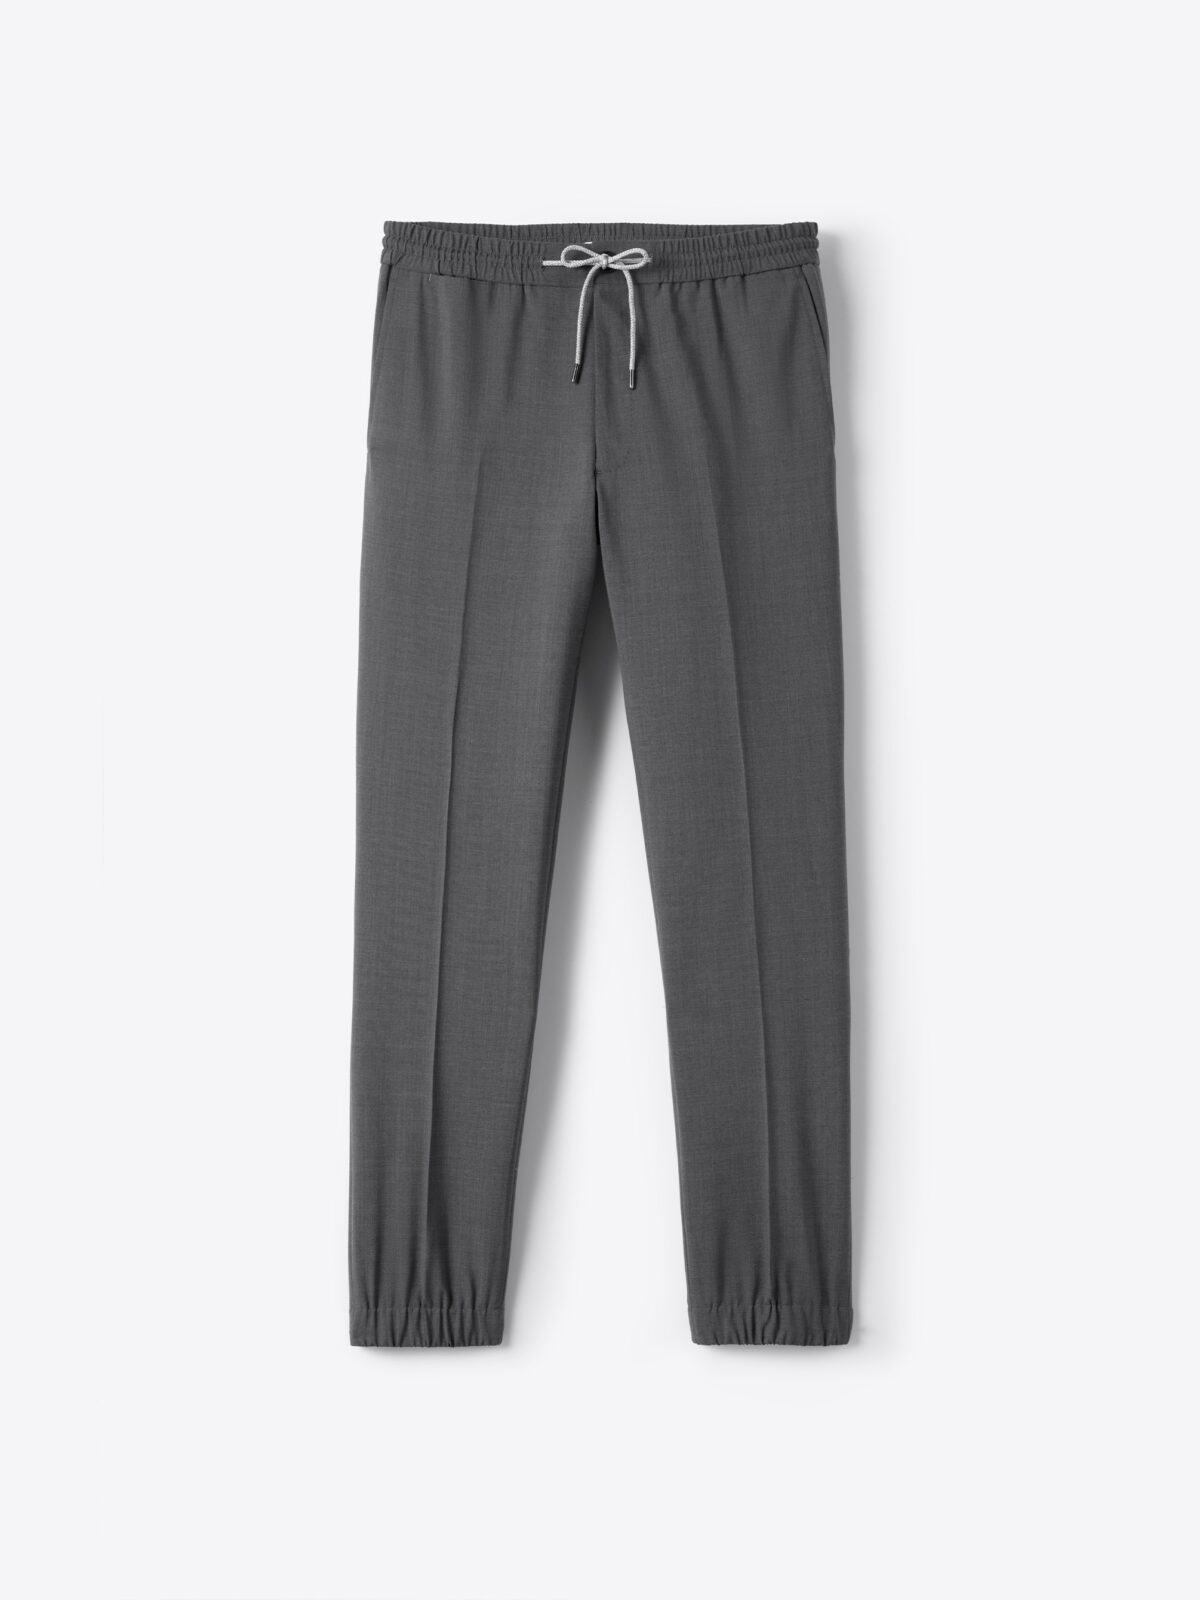 Uniqlo Women's Drape Jogger Pants  How to wear joggers, Joggers outfit,  Leggings are not pants